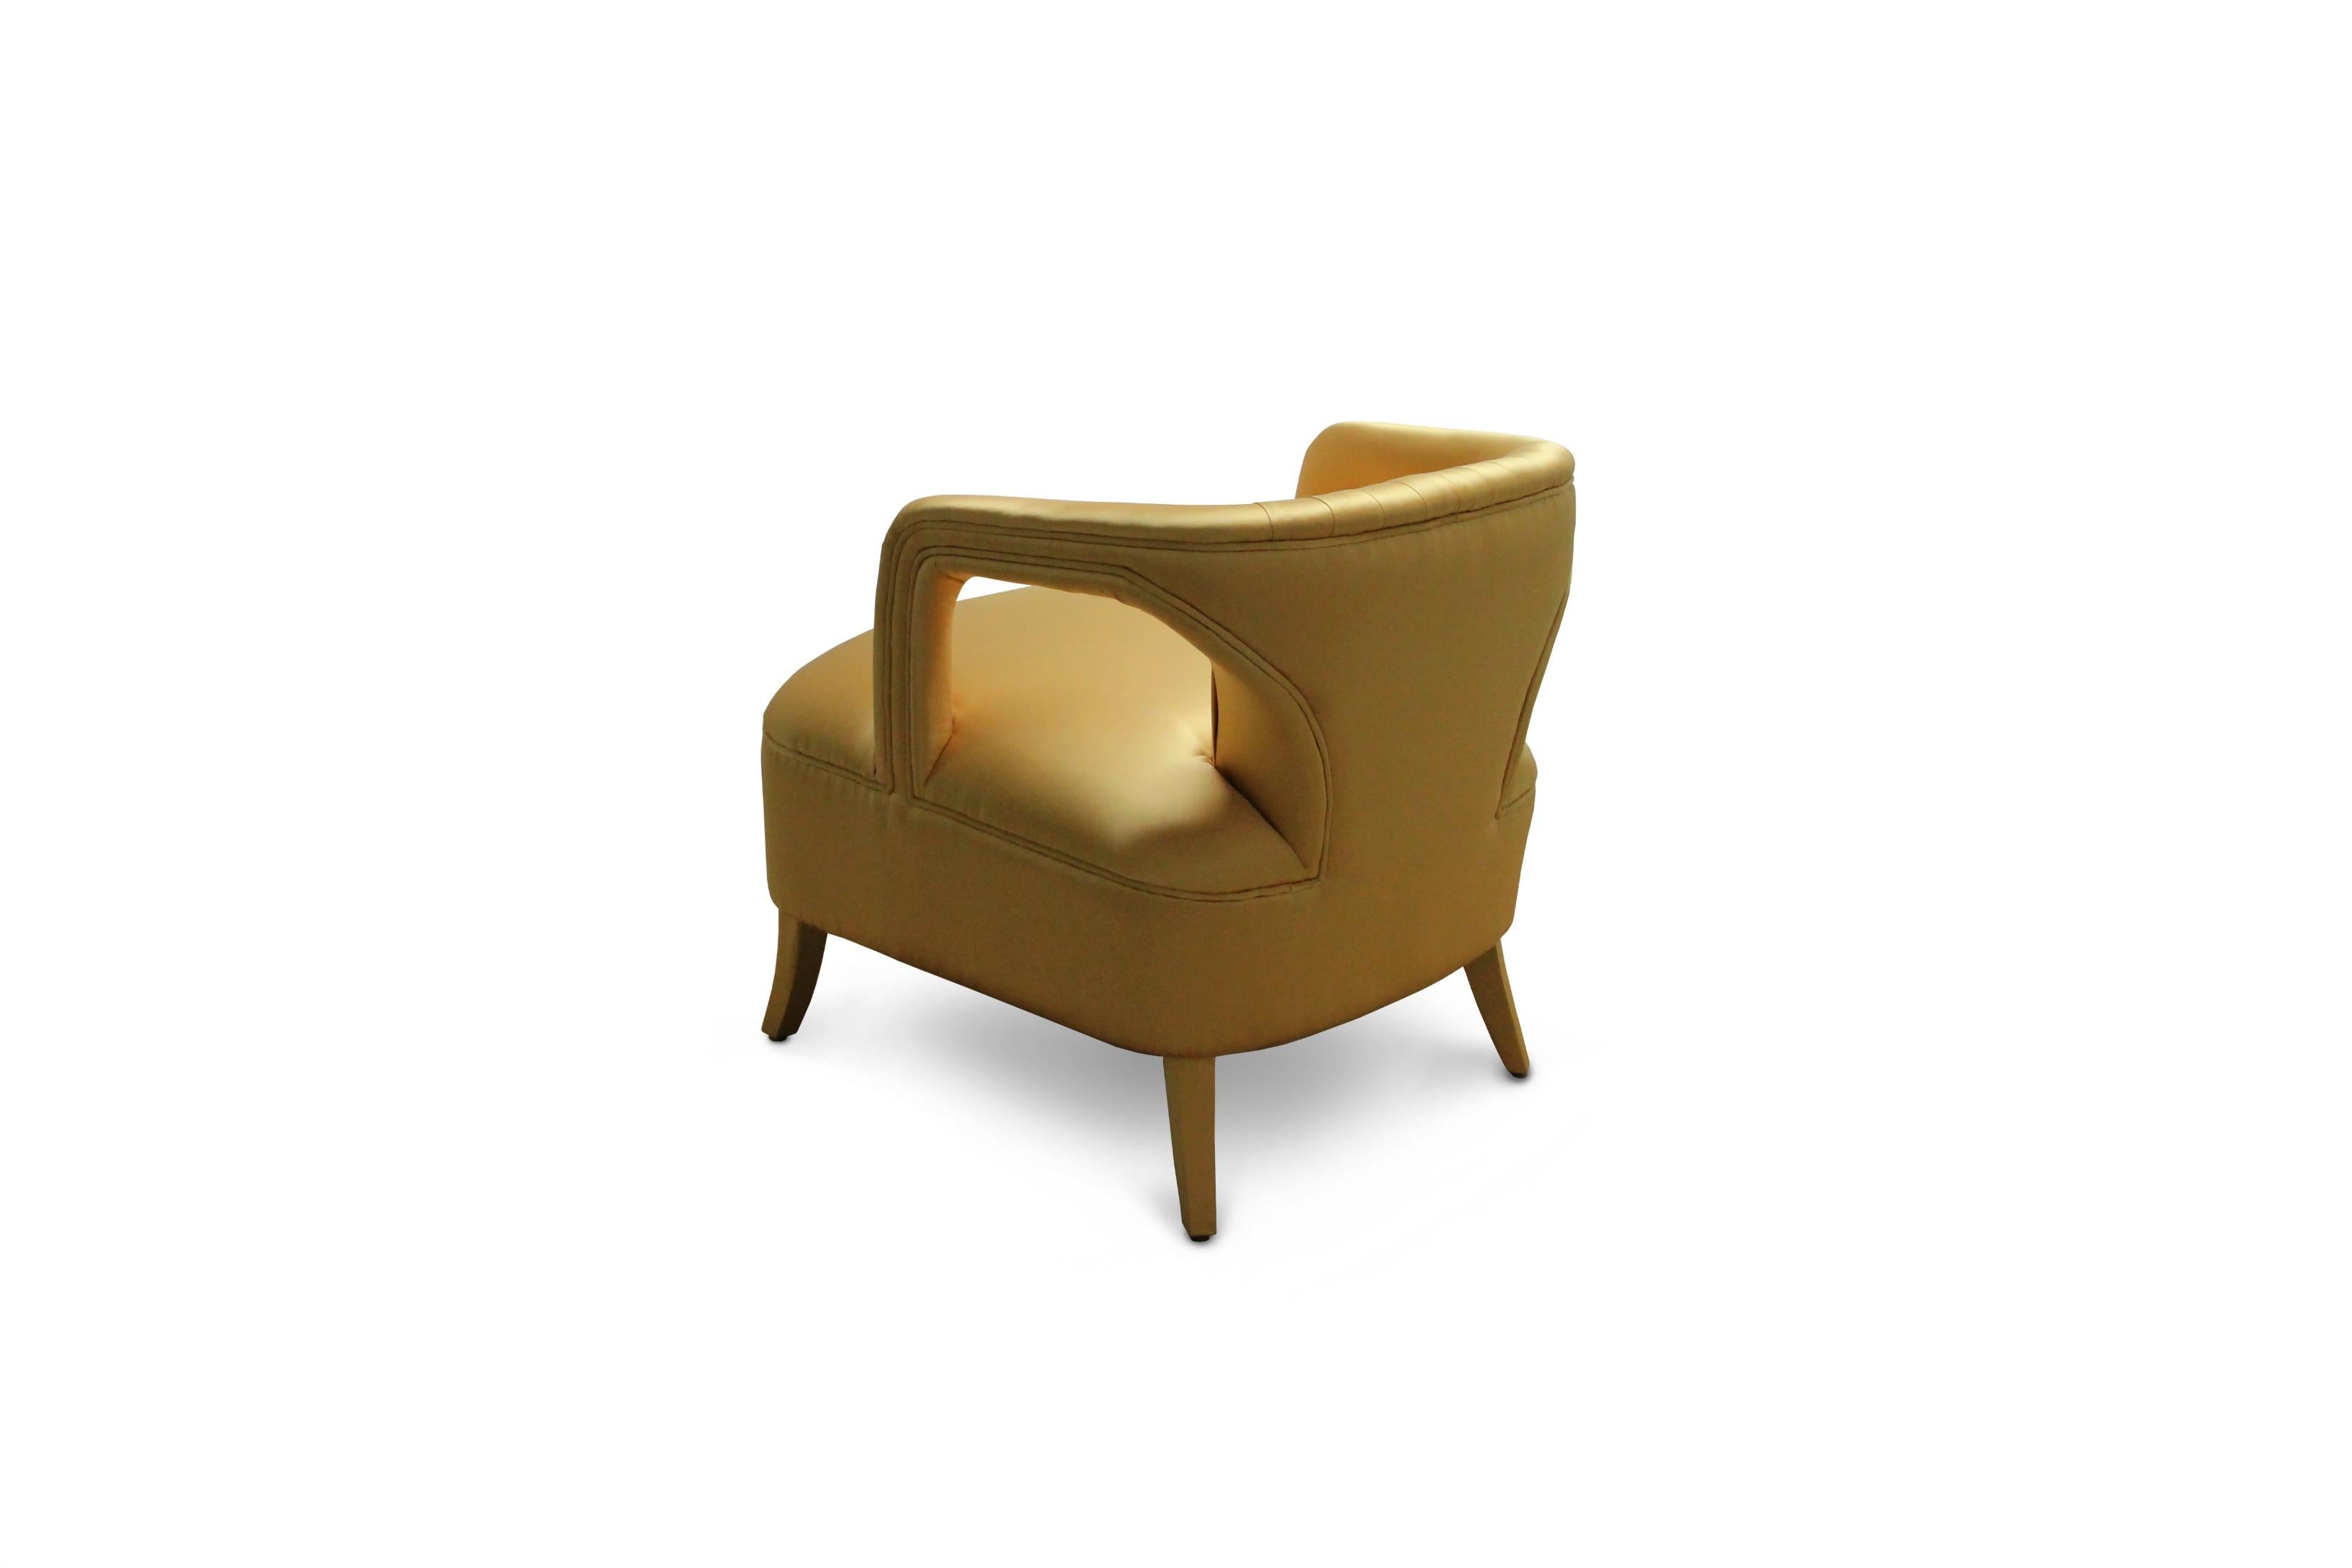 A semi-desert area in South Africa was the perfect environment to be the inspiration behind Karoo armchair. With a unique chair design and fully upholstered in cotton satin, this accent chair is sure to impress, whether in a living room set or hotel